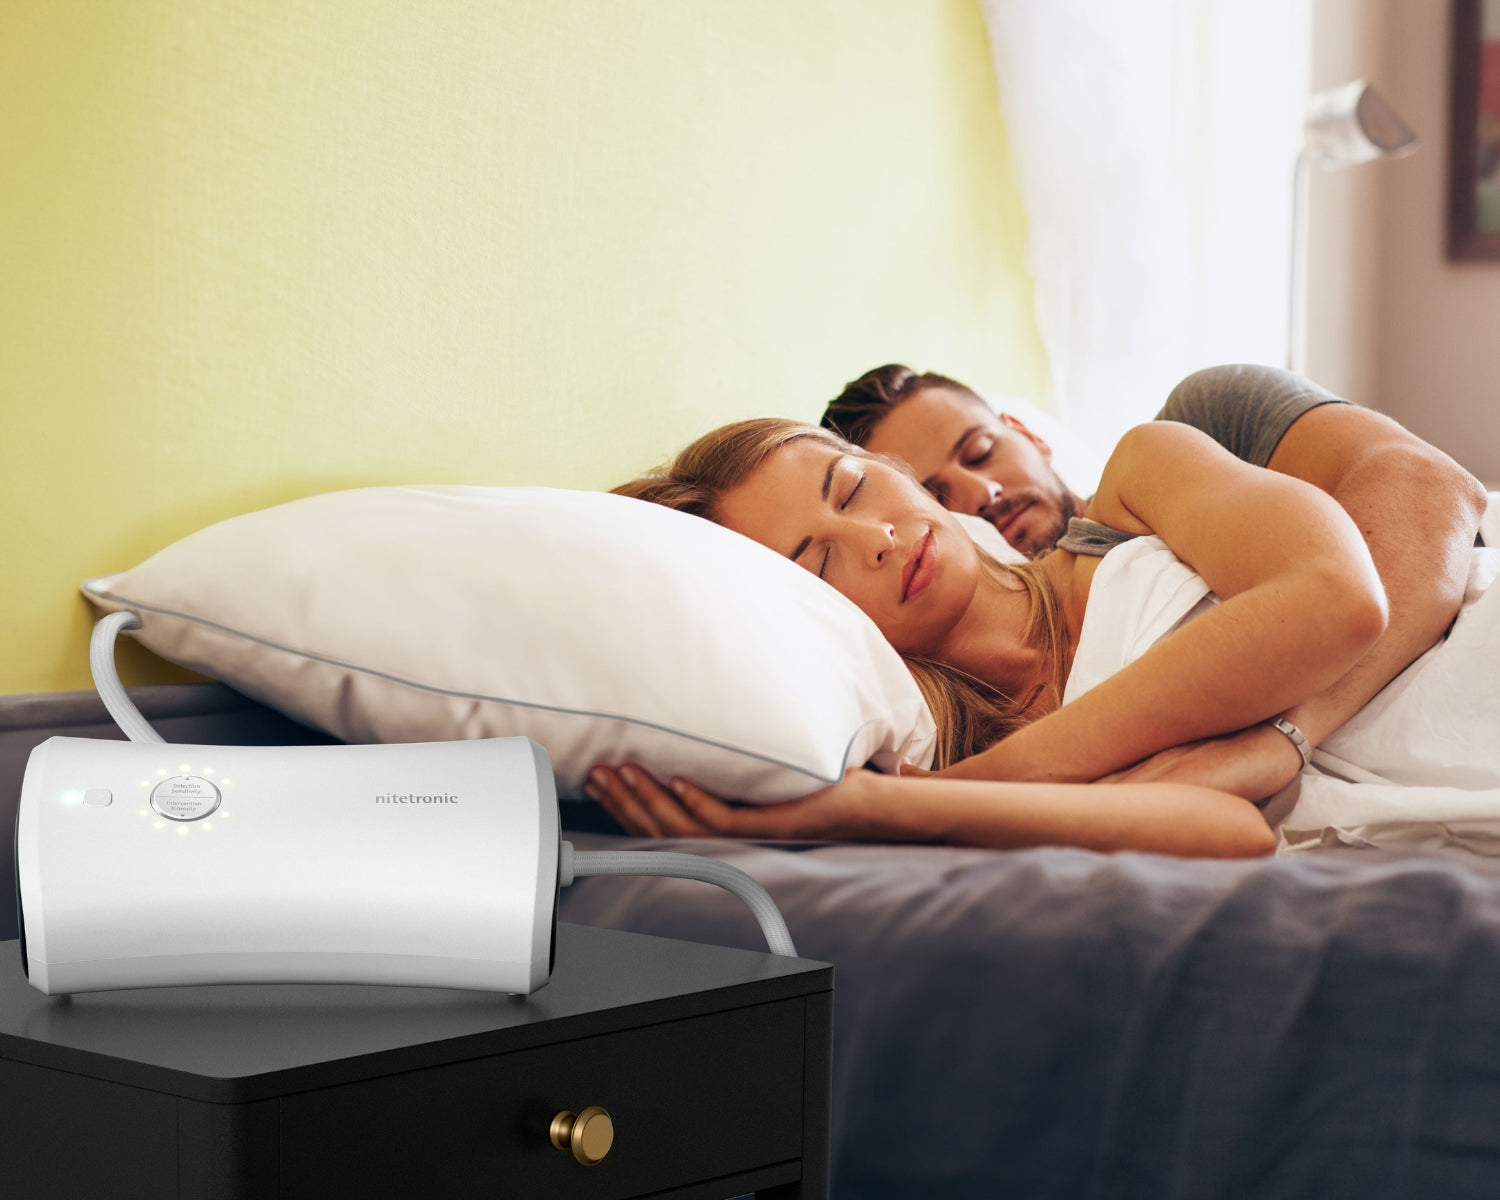 Nitetronic Z6 CPAP Pillow: A Comfortable and Effective Snoring Therapy